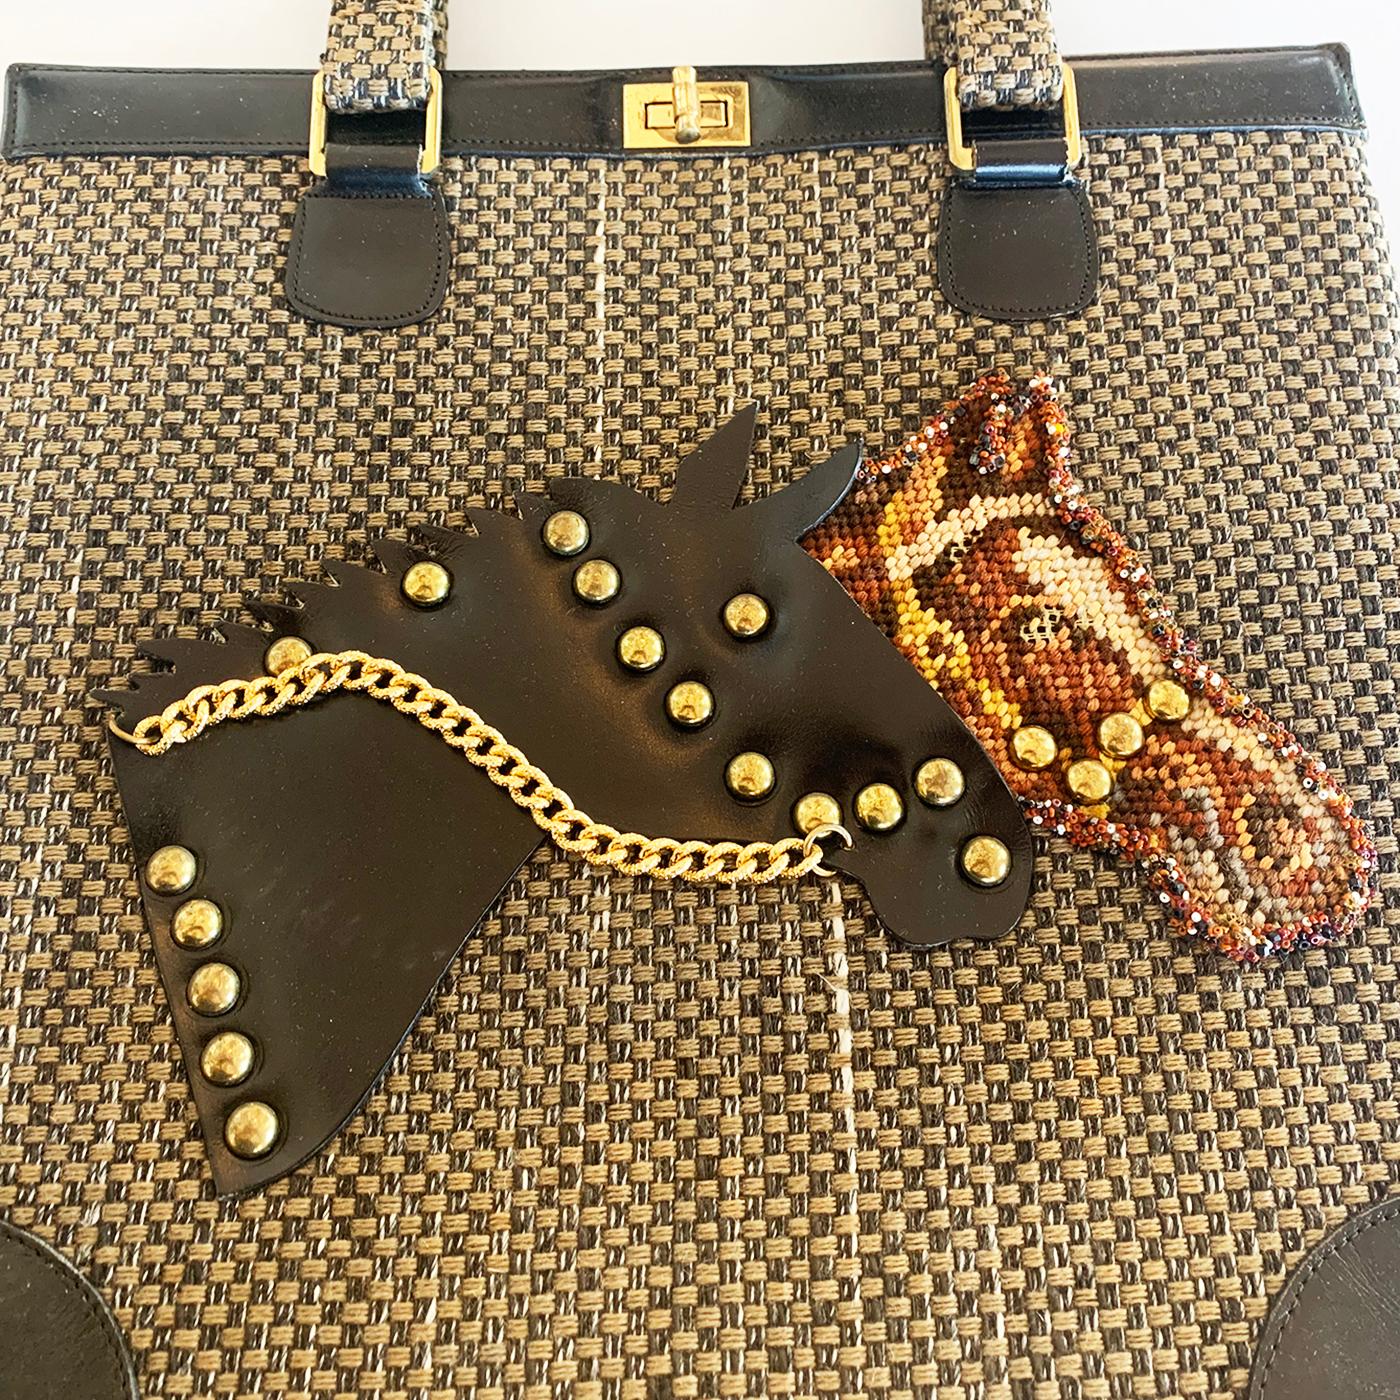 Mid Century Handbag  with two Horses to front. Production and design by “Jolles Original” for “Dottie Berke”, as tagged to interior, plus “Handbags – Jewelry”, over “Invington, New Jersey”  (USA). A real Fun design with 2 horse heads to front, one